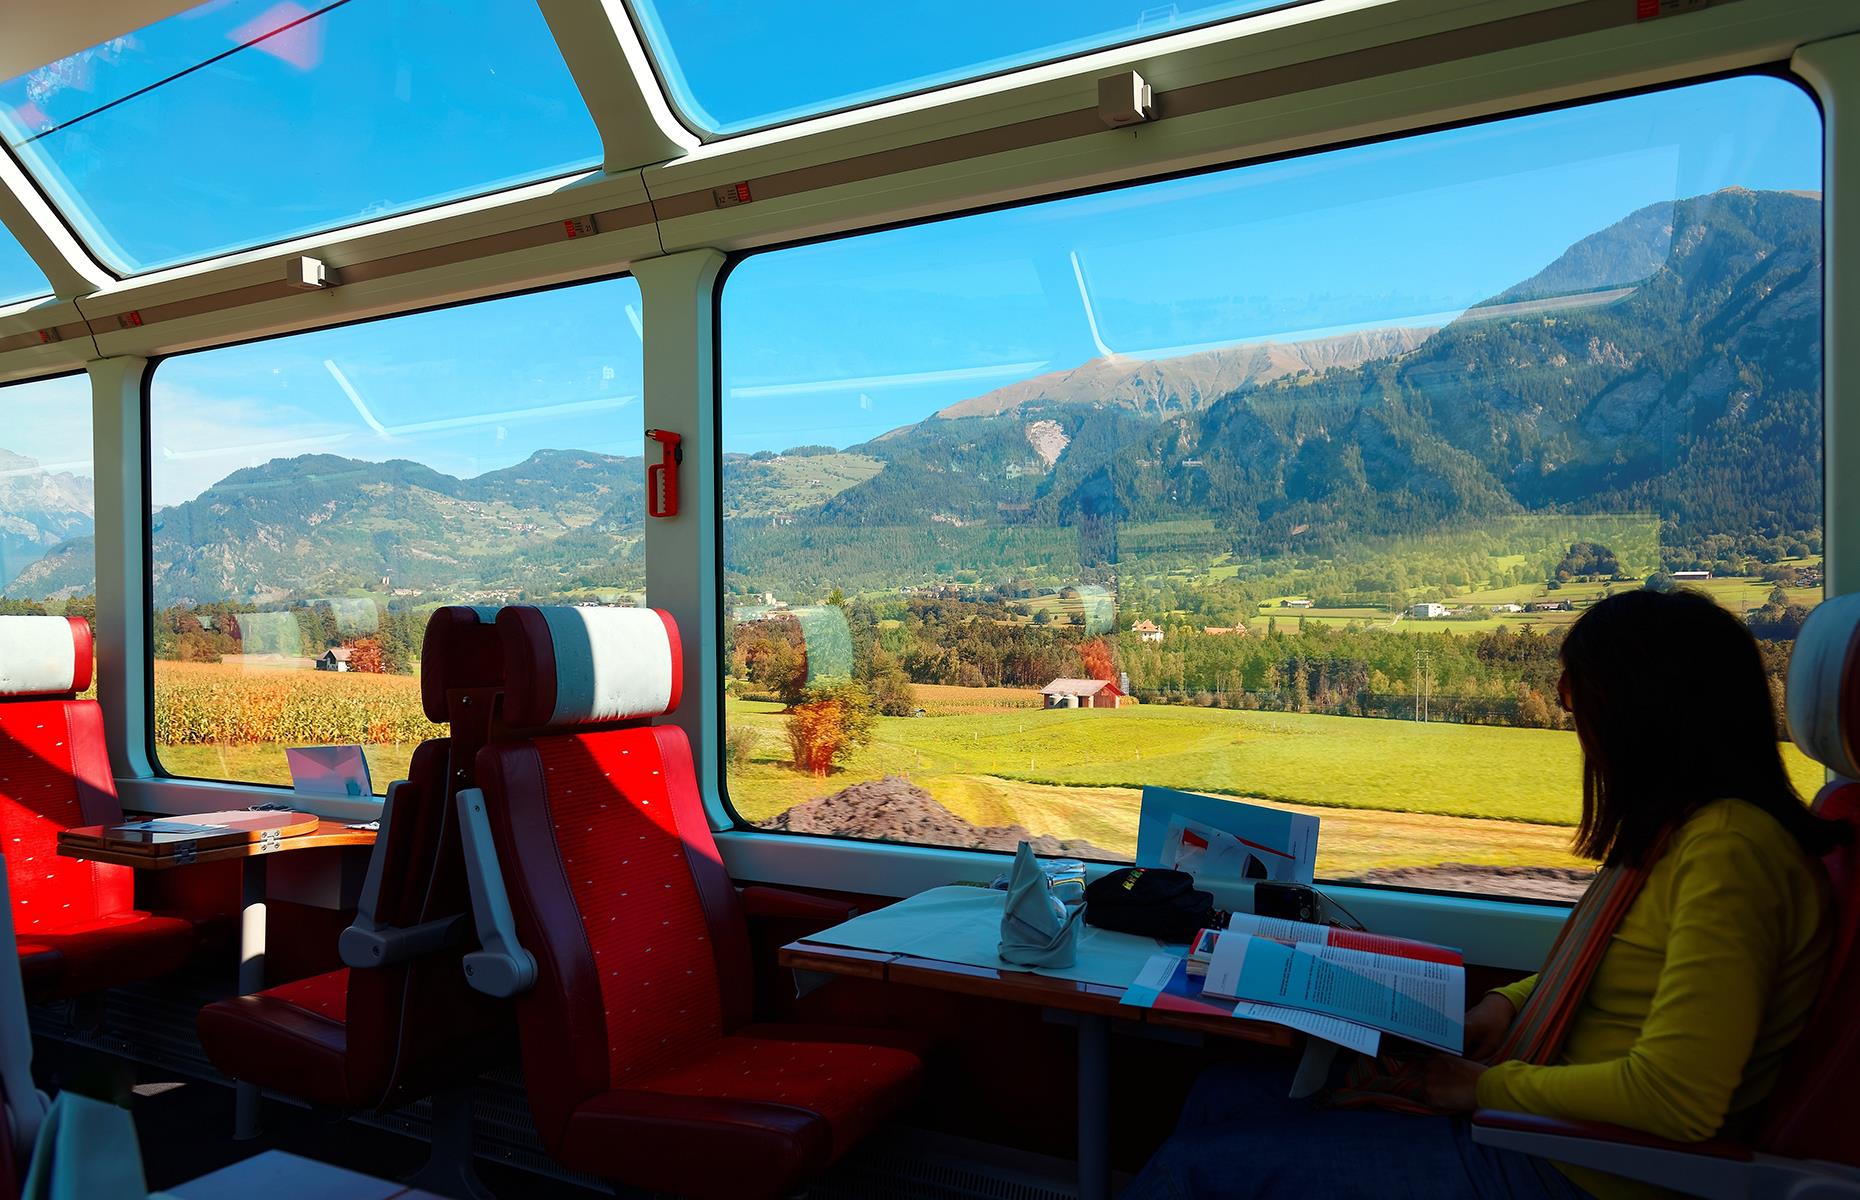 Although you might expect to have to pay dearly for such a stunning train ride, the journey will only set you back around $150 (£120) for a one-way, second-class ticket. You can choose to pay a $44 (£35) supplement for a three-course lunch or you're free to bring your own food, drink and even a bottle of wine on board. There is a food service car and staff come down the train taking orders. The panoramic coaches were specially built for the service in 2006.